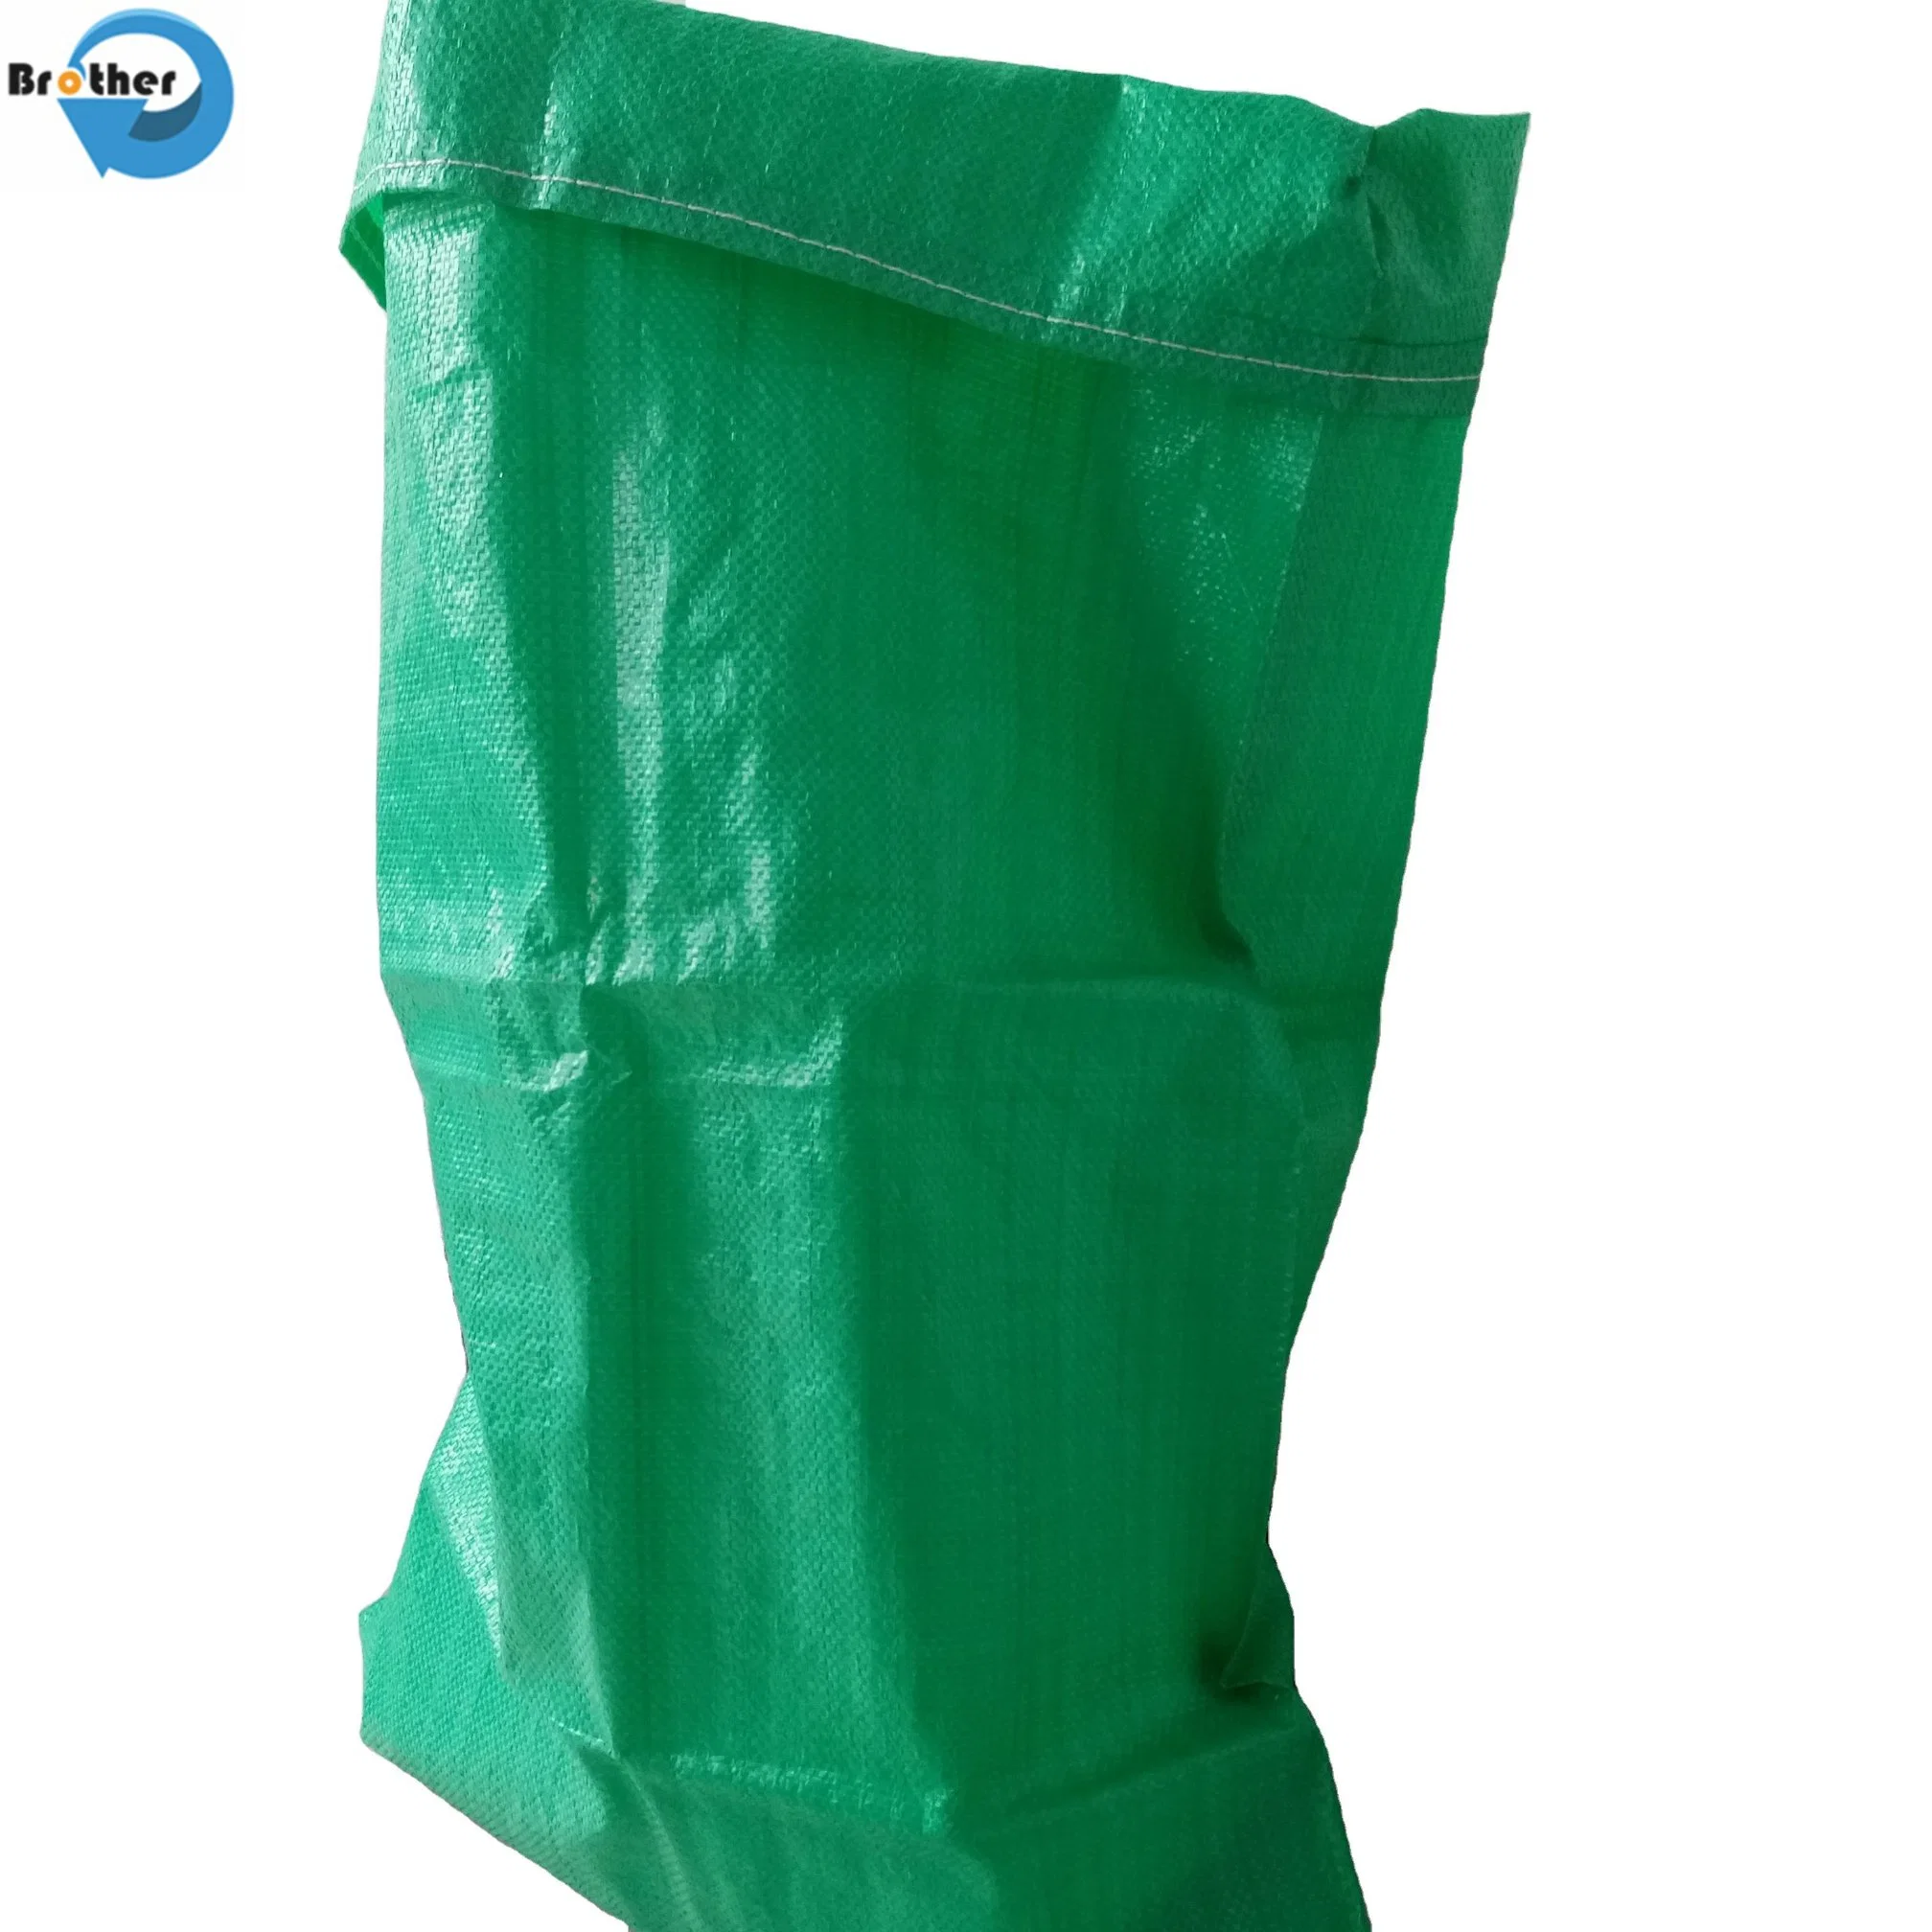 Printed Rice/Flour/Feed/Grain/Sand/Ferterlizer/Sugar/Mailing/Seed/Courier/PP Woven/PP/Plastic/Packaging/Shopping/Packing/Woven/PE/Hand/Tote/Tubular/Recycle/ Bag